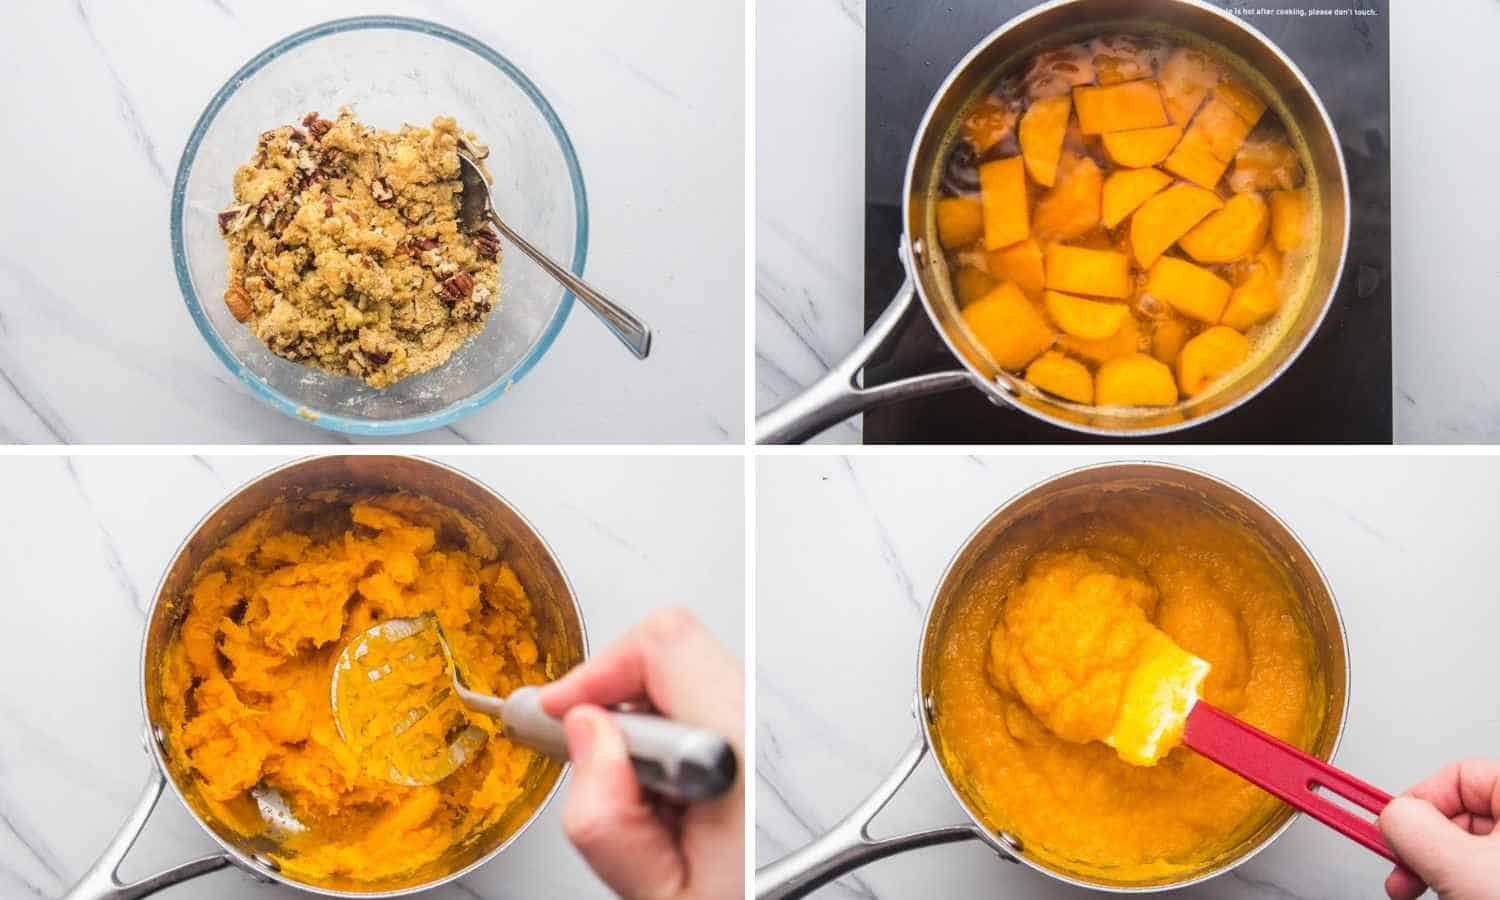 Collage of four images showing how to make topping, and boil sweet potatoes and mash them